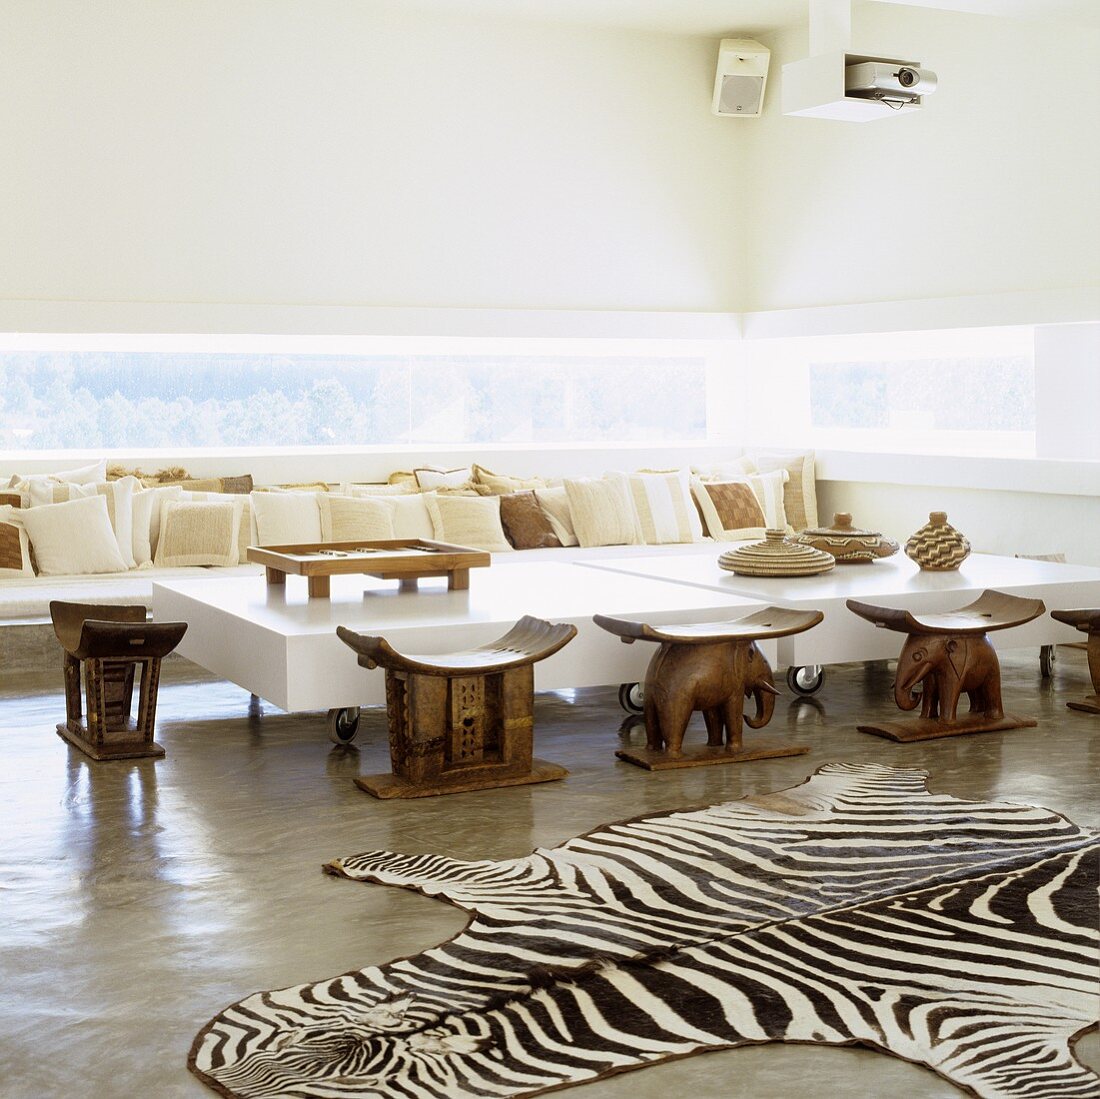 A Mediterranean designer house - a zebra rug in front of ethnic wooden stools and a designer coffee table